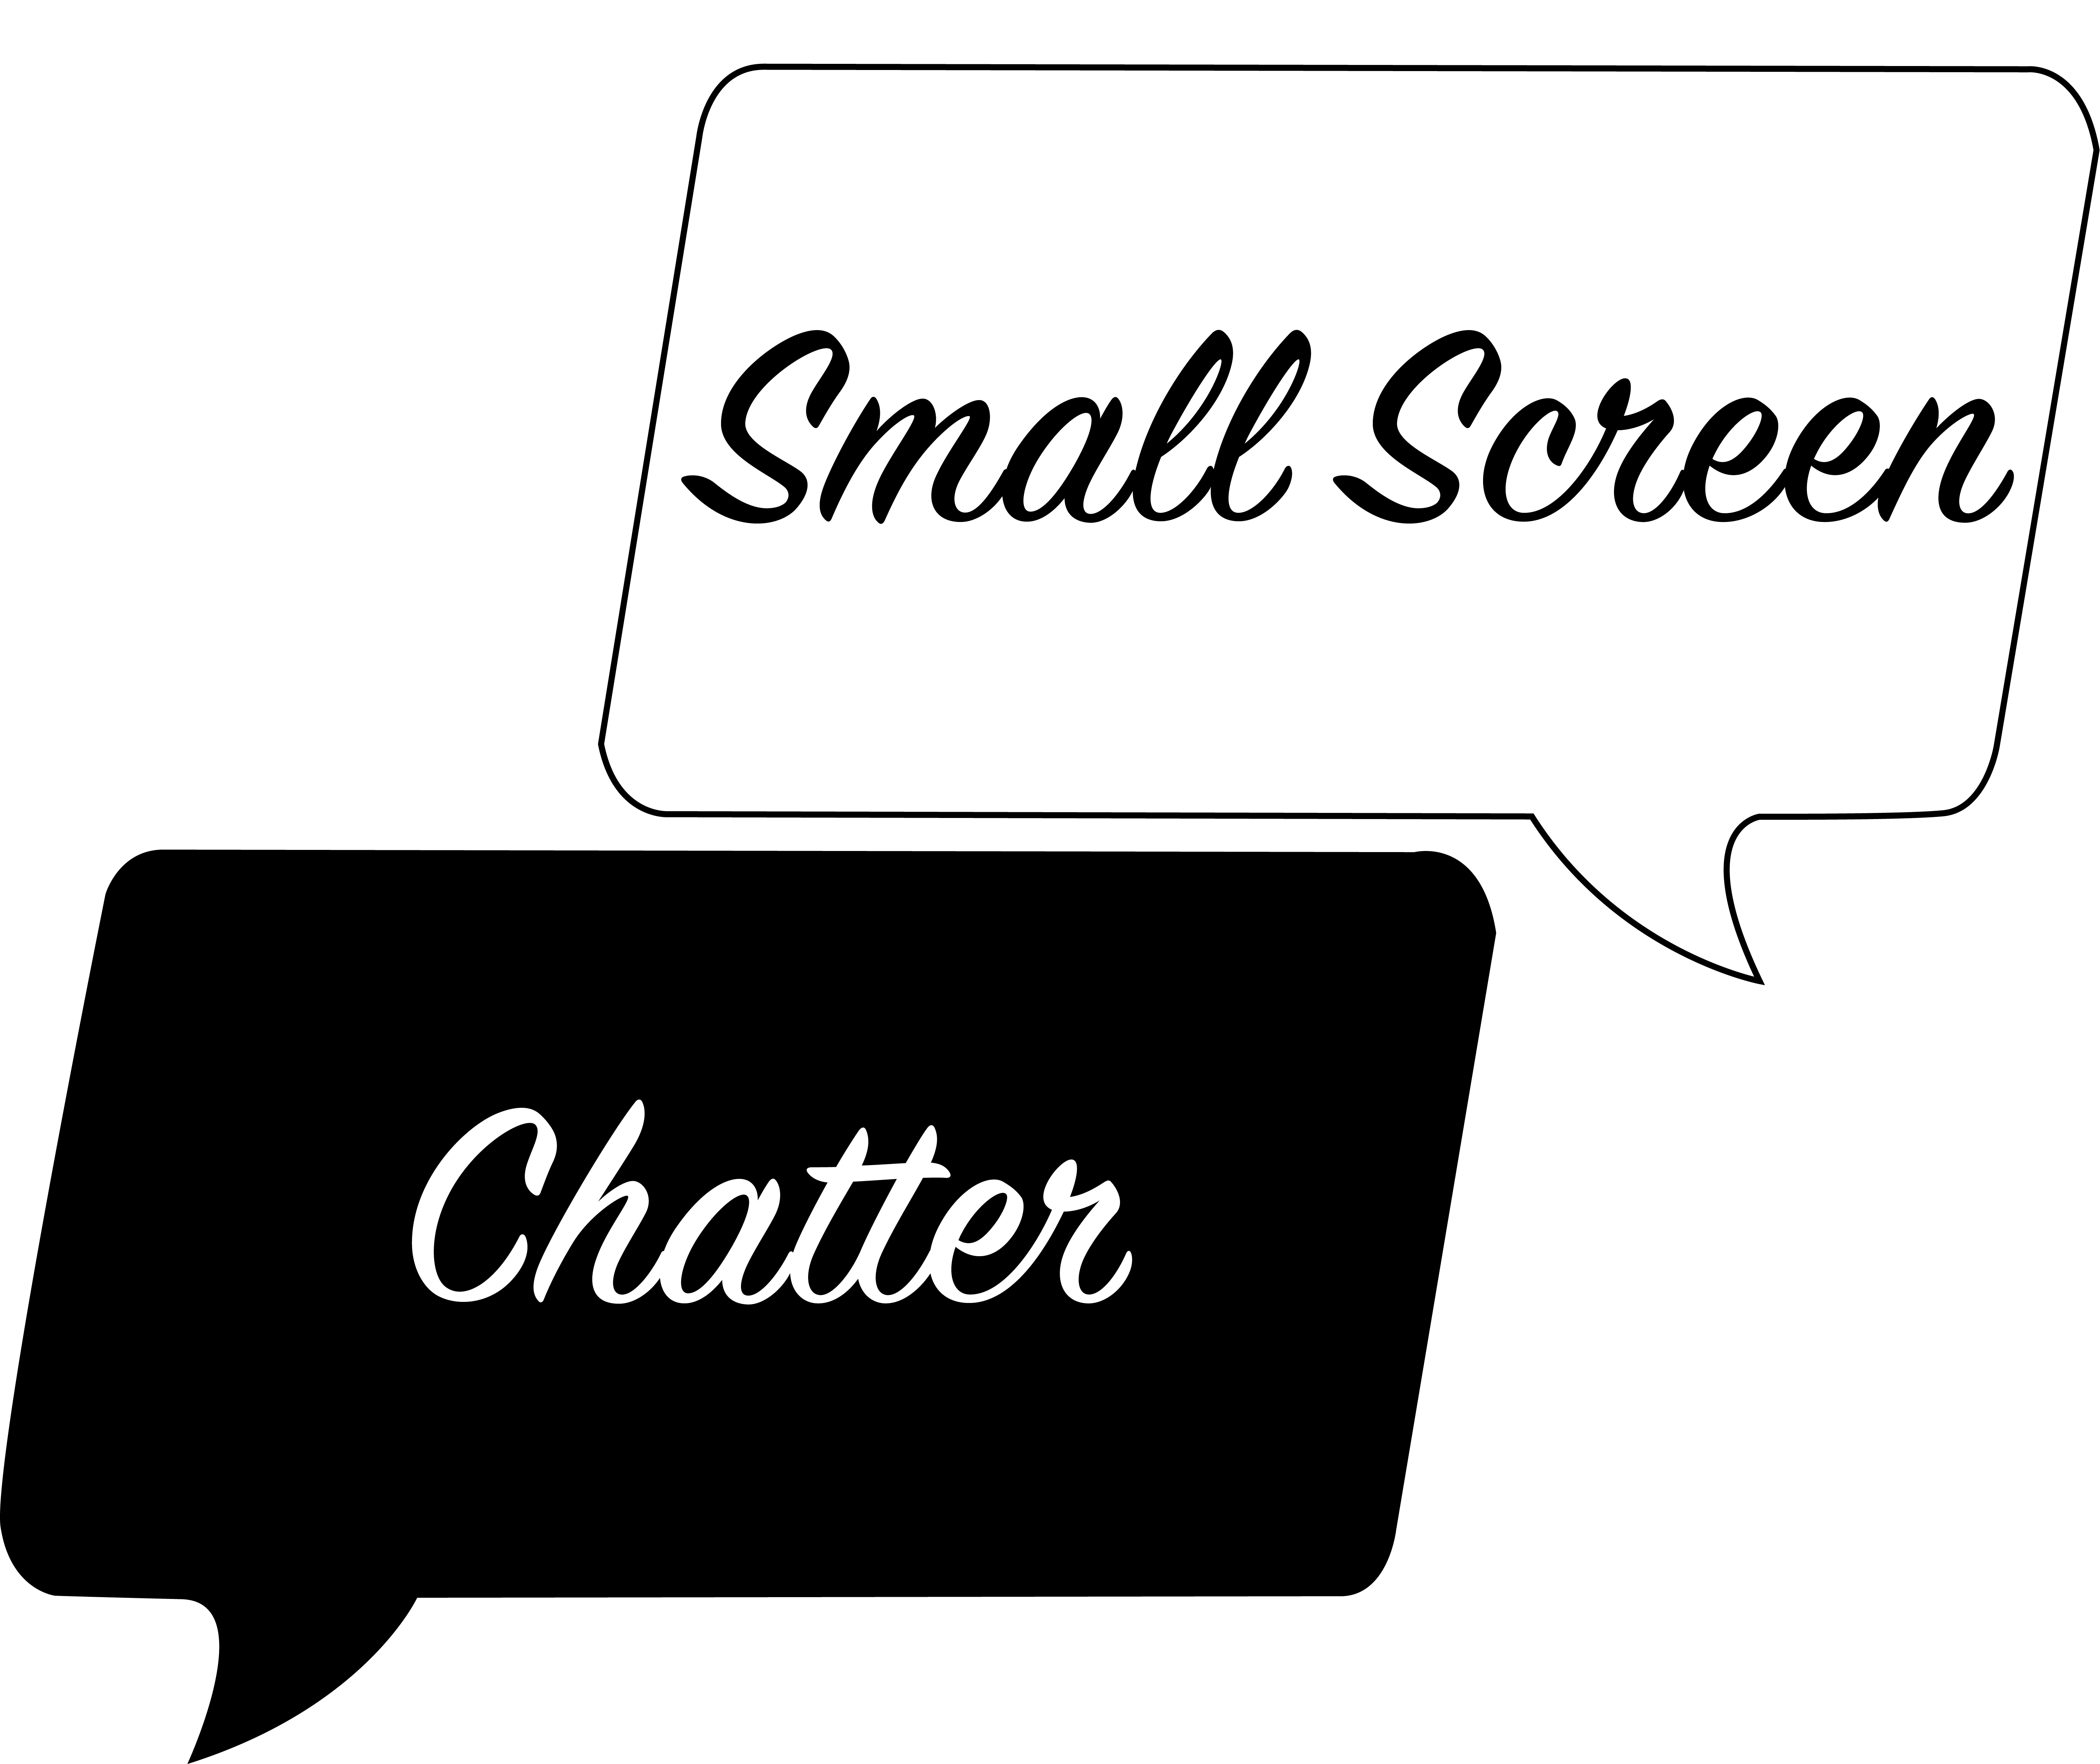 Small Screen Chatter